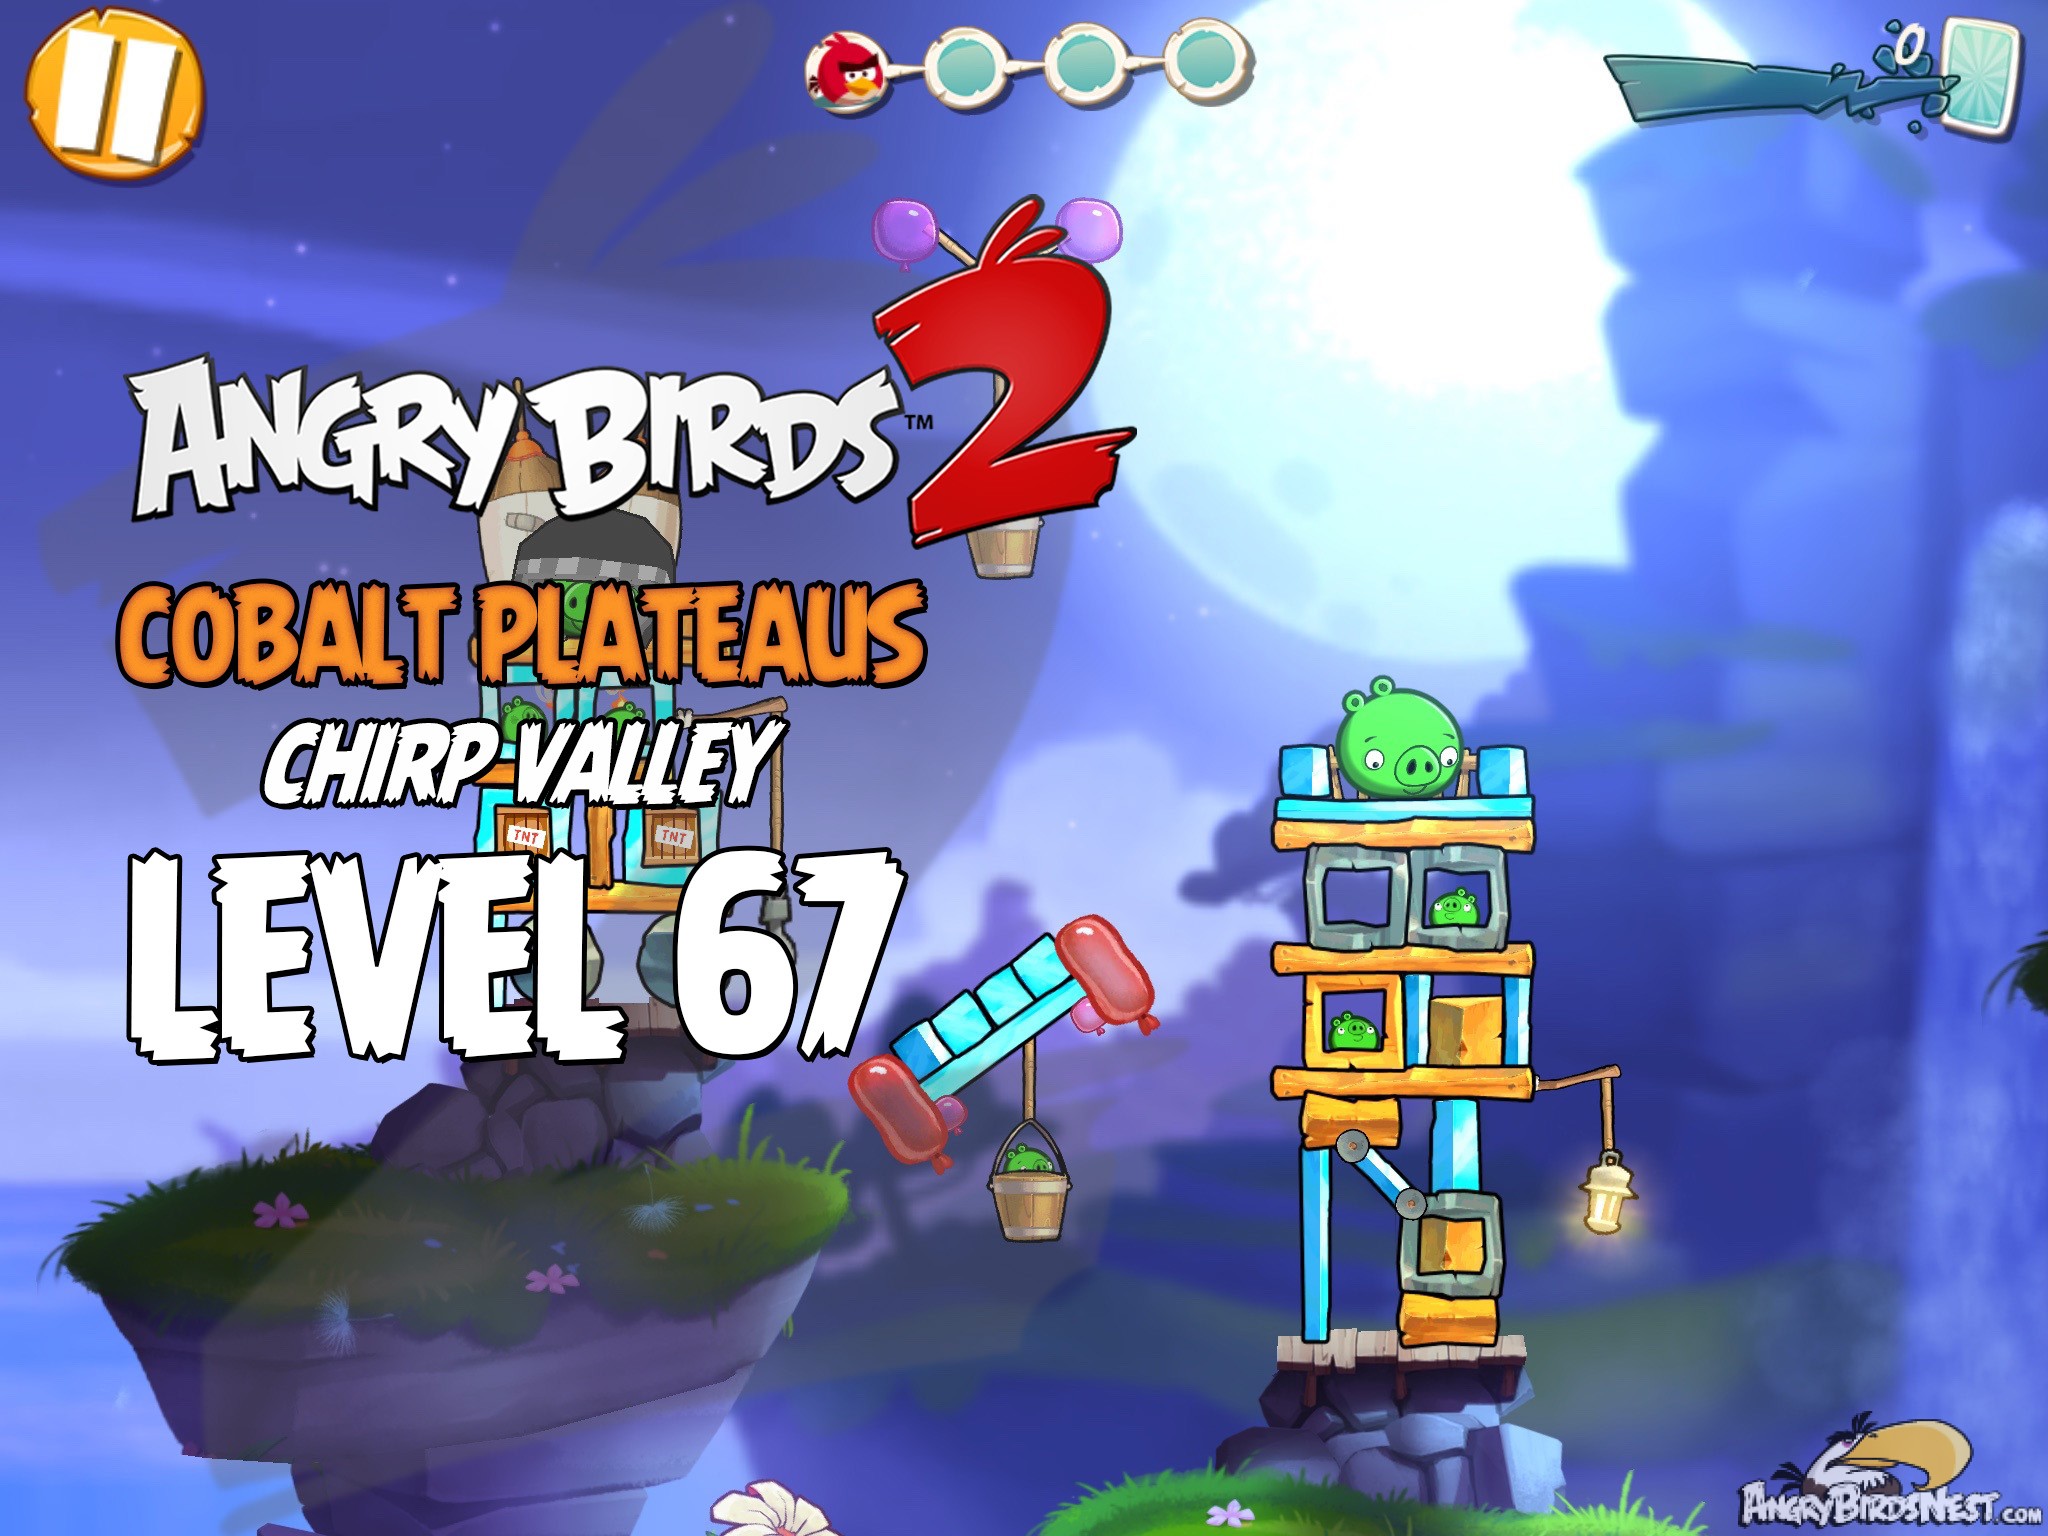 Angry Birds 2 Cobalt Plateaus Chirp Valley Level 67